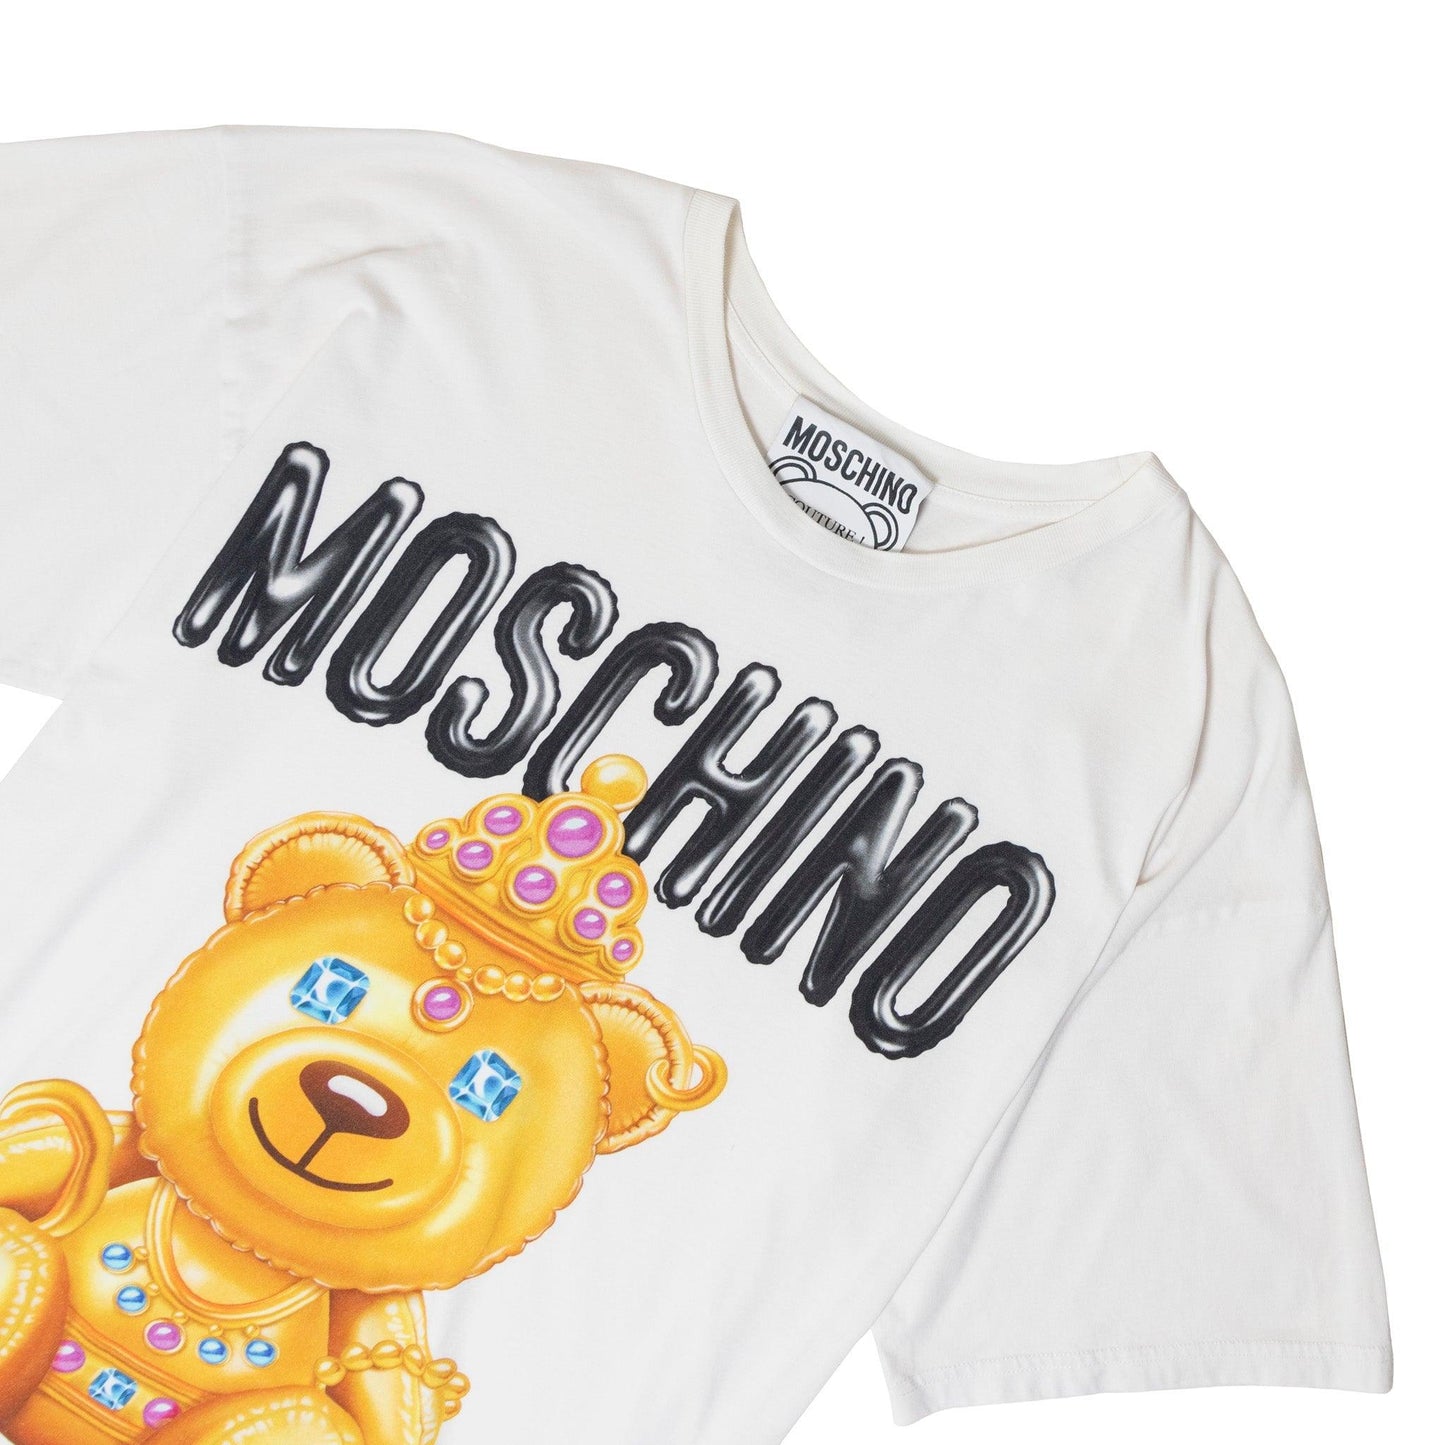 Moschino Couture Jewel Bear Tee - Known Source